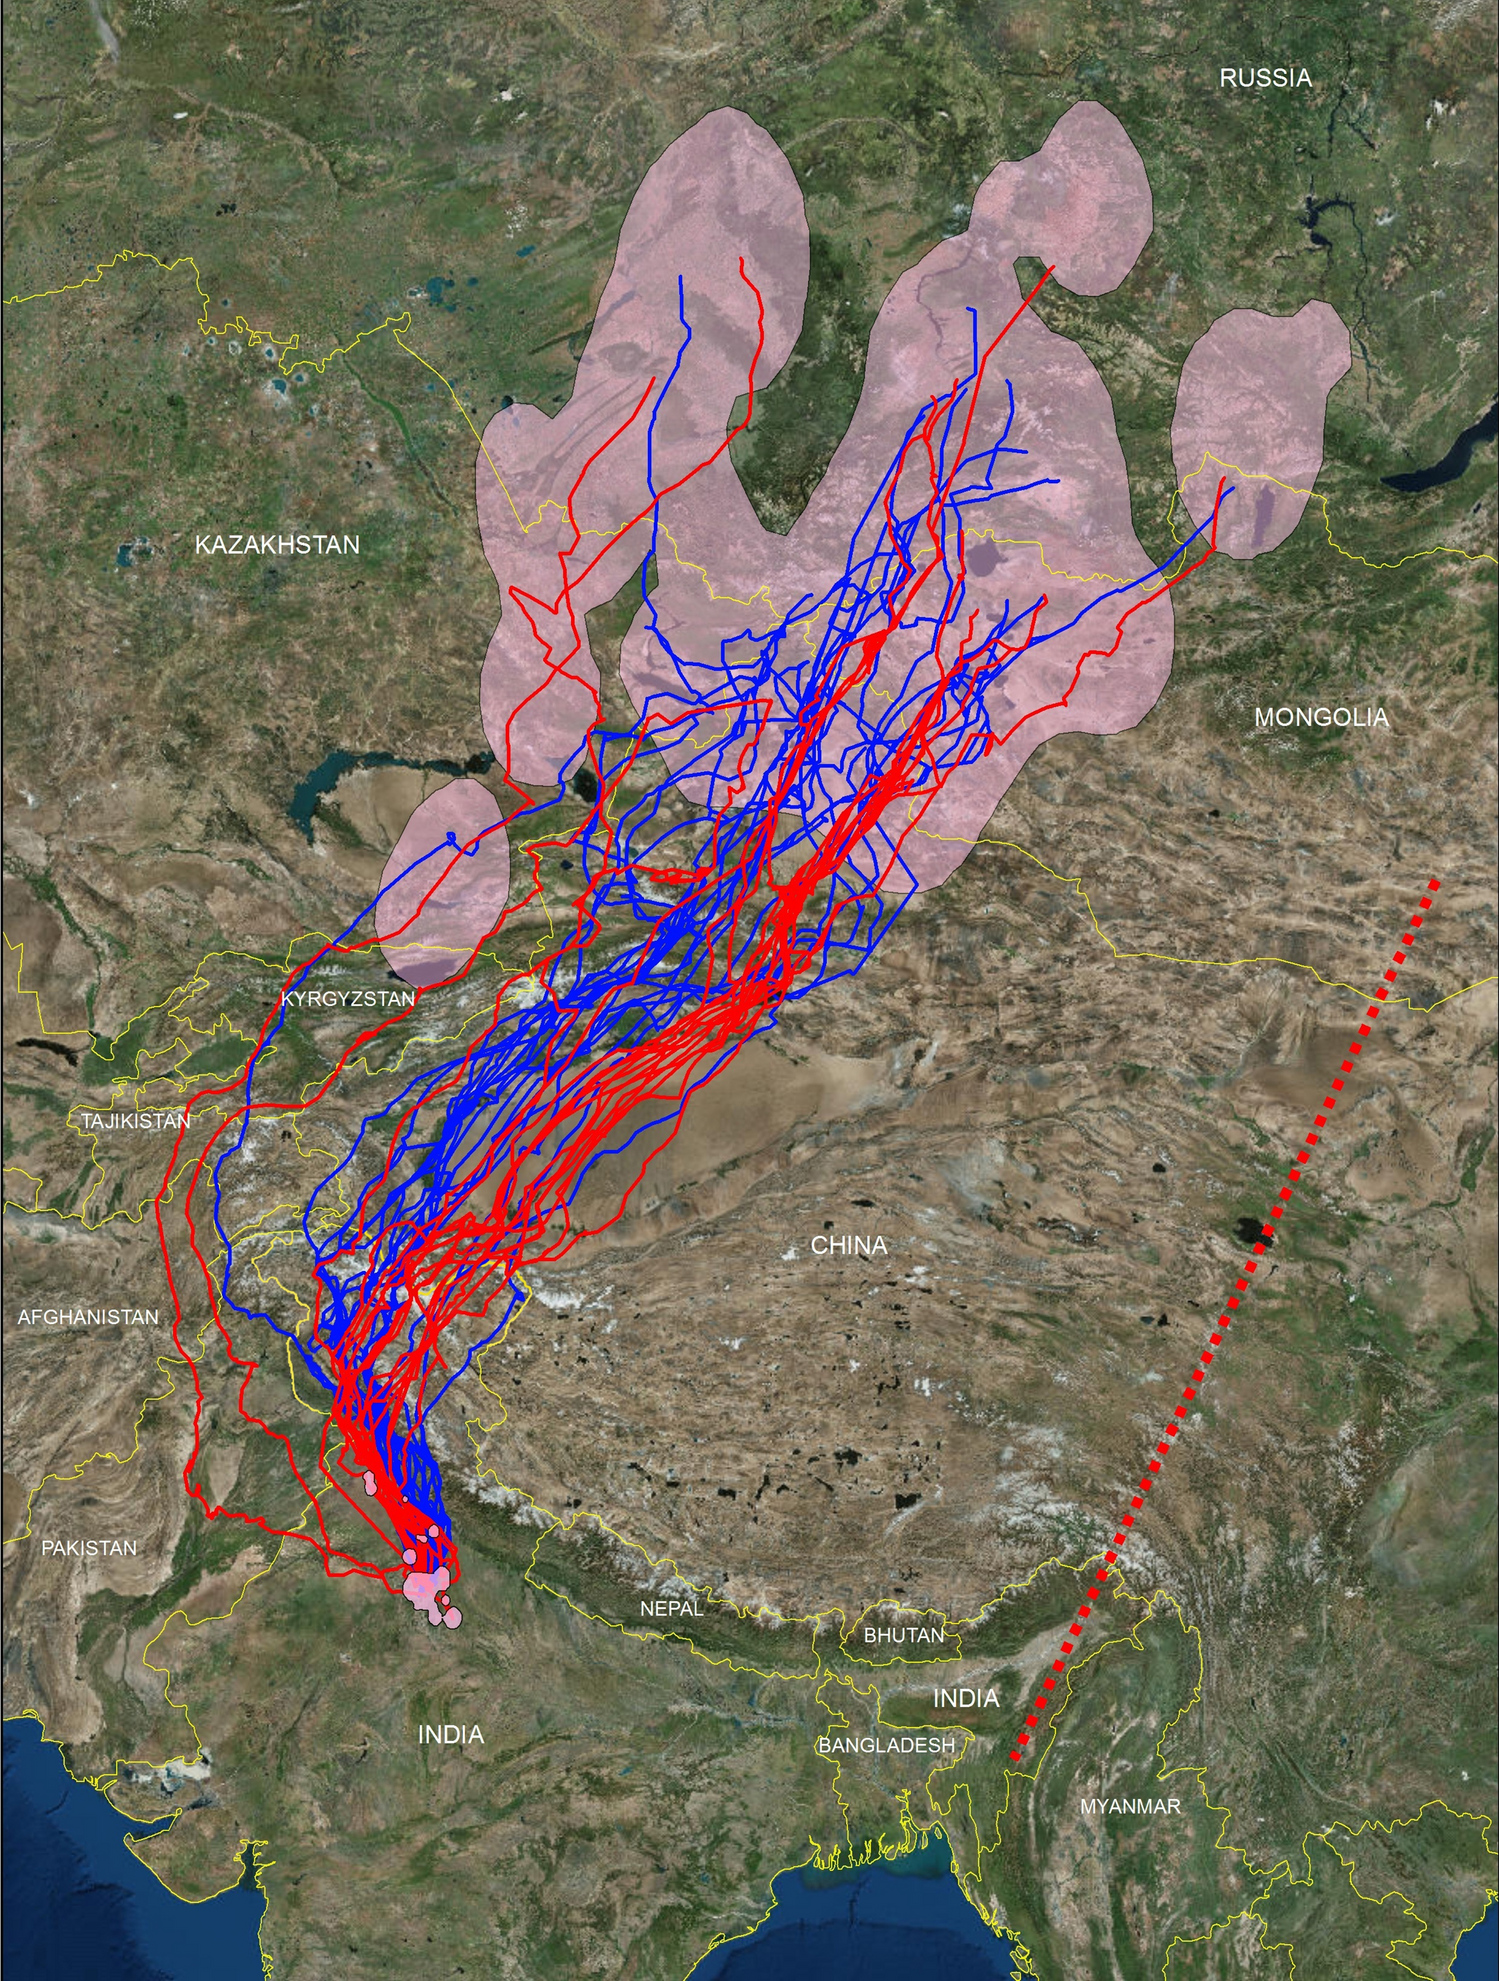 Gps Telemetry Unveils The Regular High Elevation Crossing Of The Himalayas By A Migratory Raptor Implications For Definition Of A Central Asian Flyway Scientific Reports